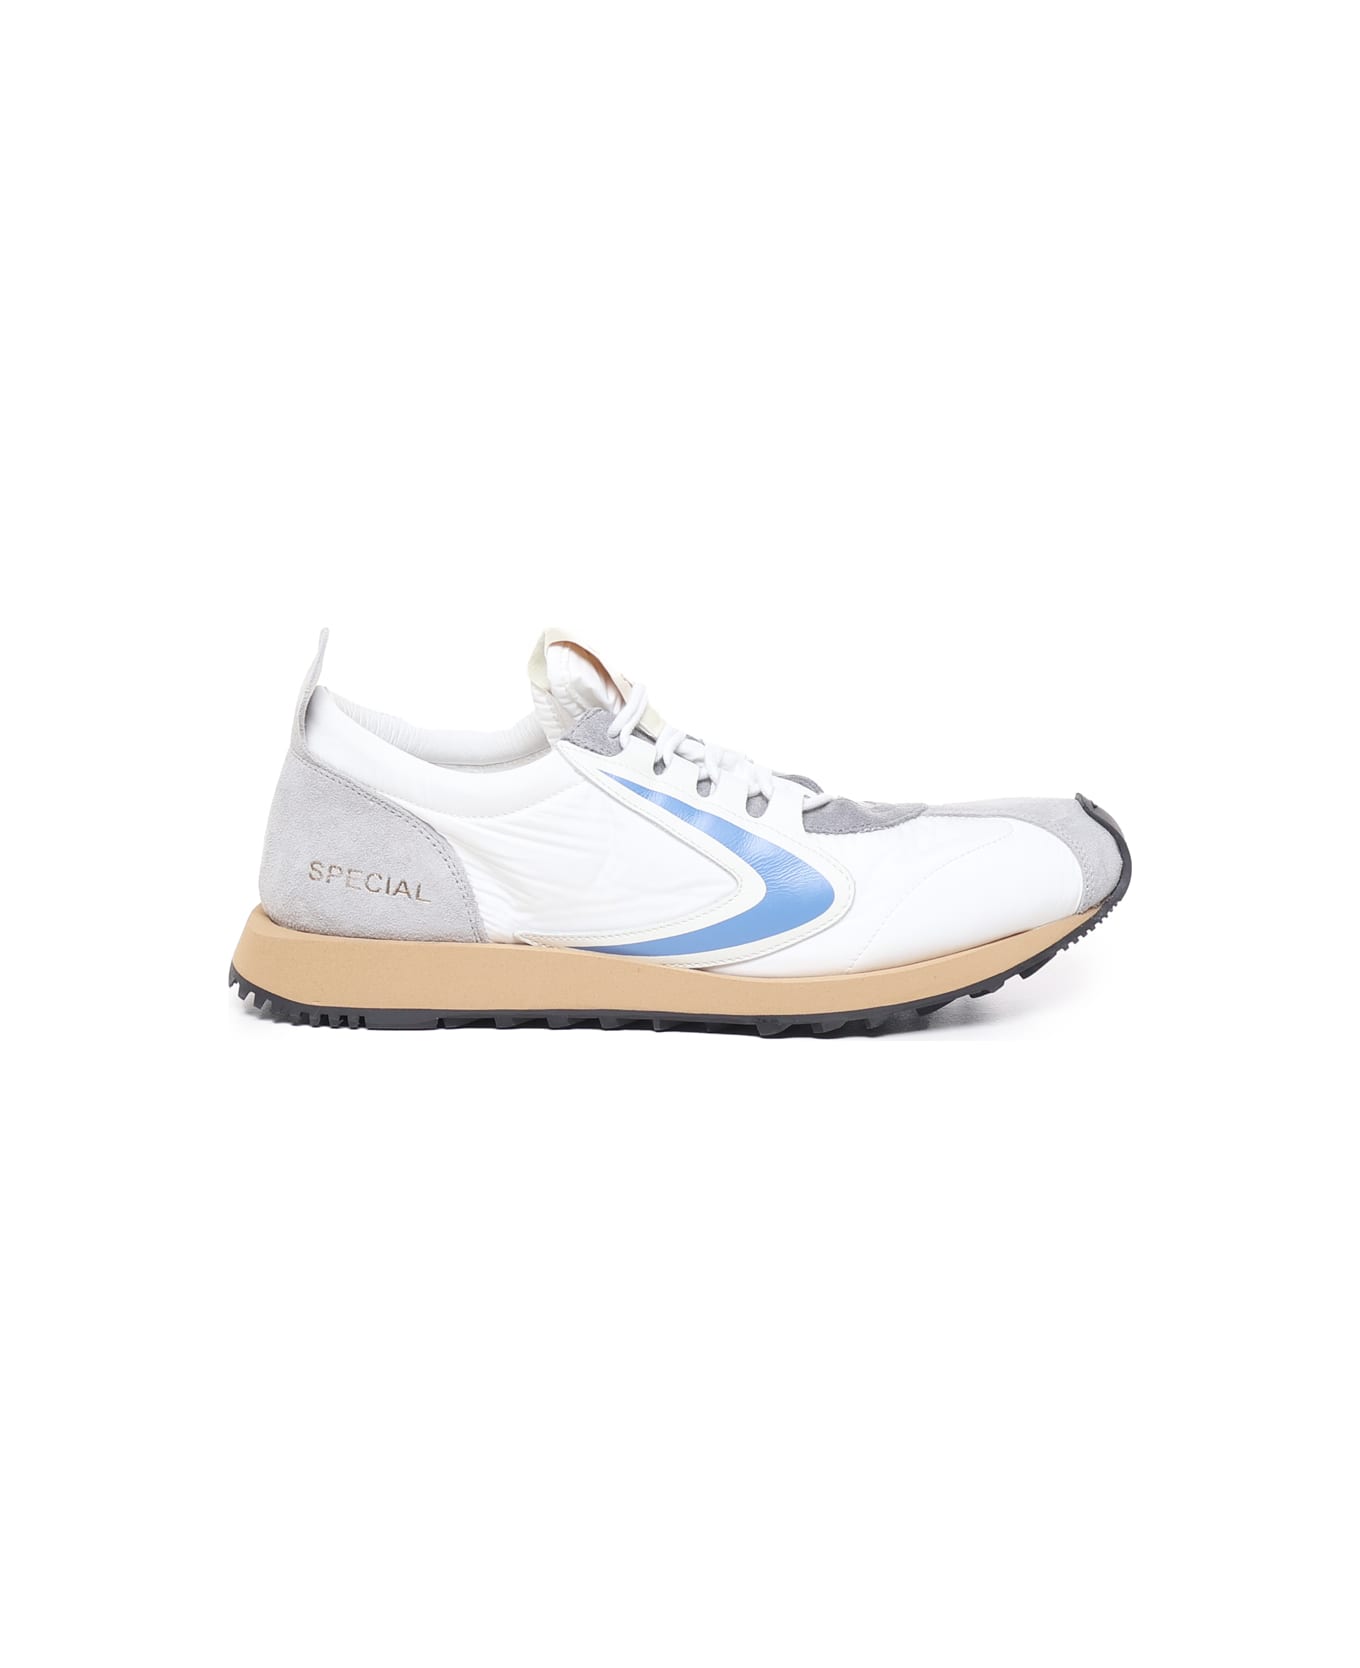 Valsport Special 16 Sneakers - White, grey, light blue